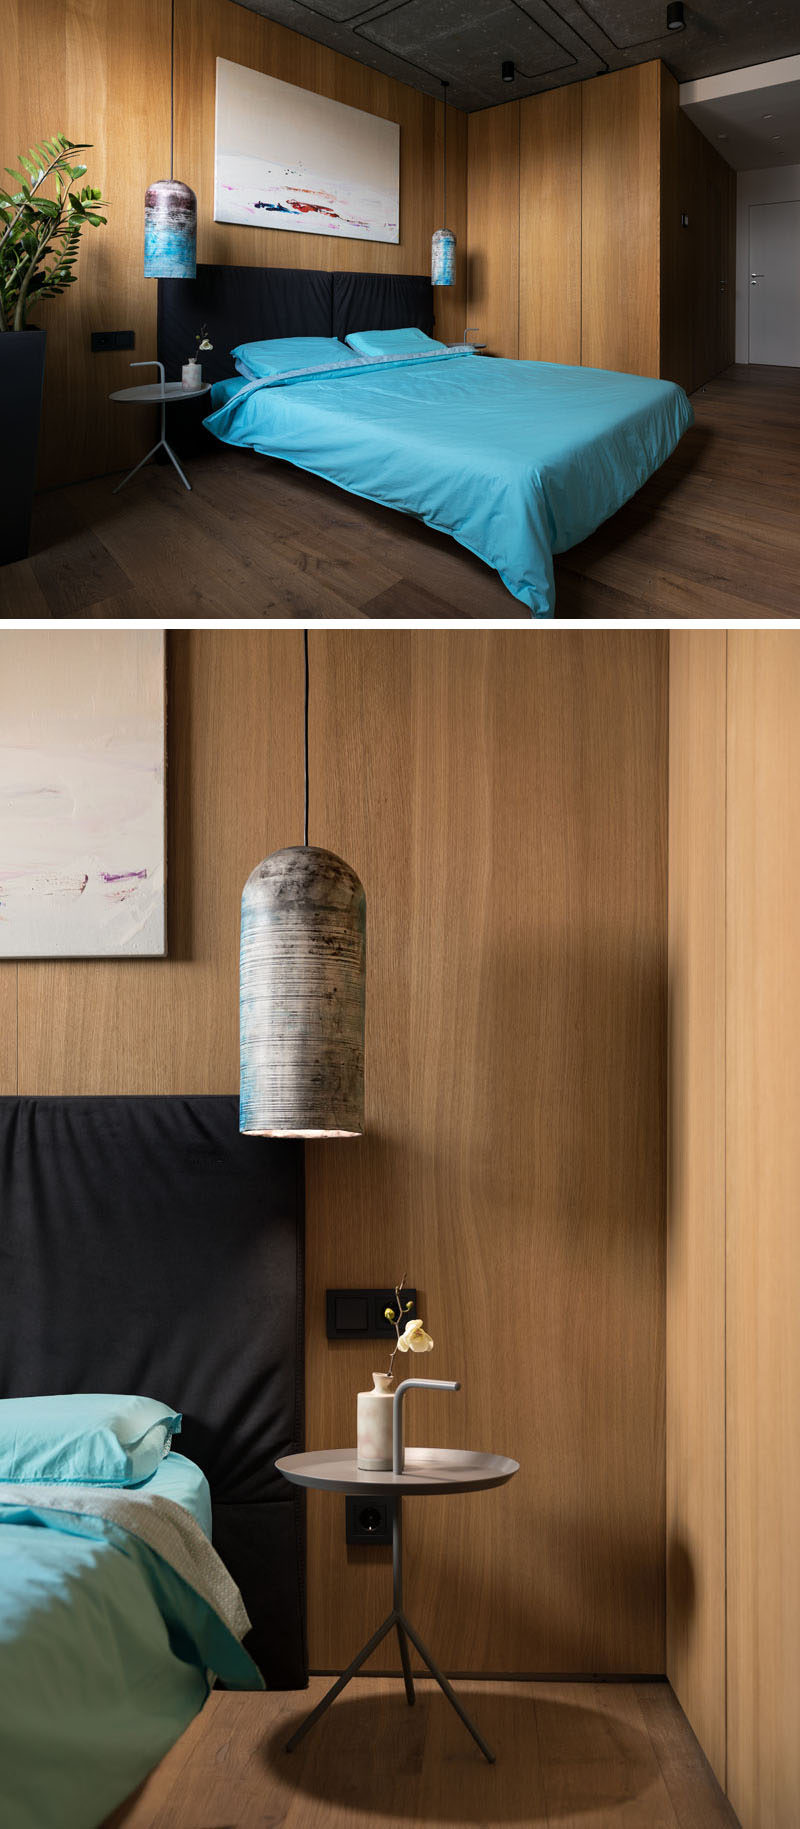 This modern guest bedroom has wood walls and floors, adds a punch of color with use of teal bedding and colorful pendant lights. A simple art piece hangs above the bed to break up the wood wall.